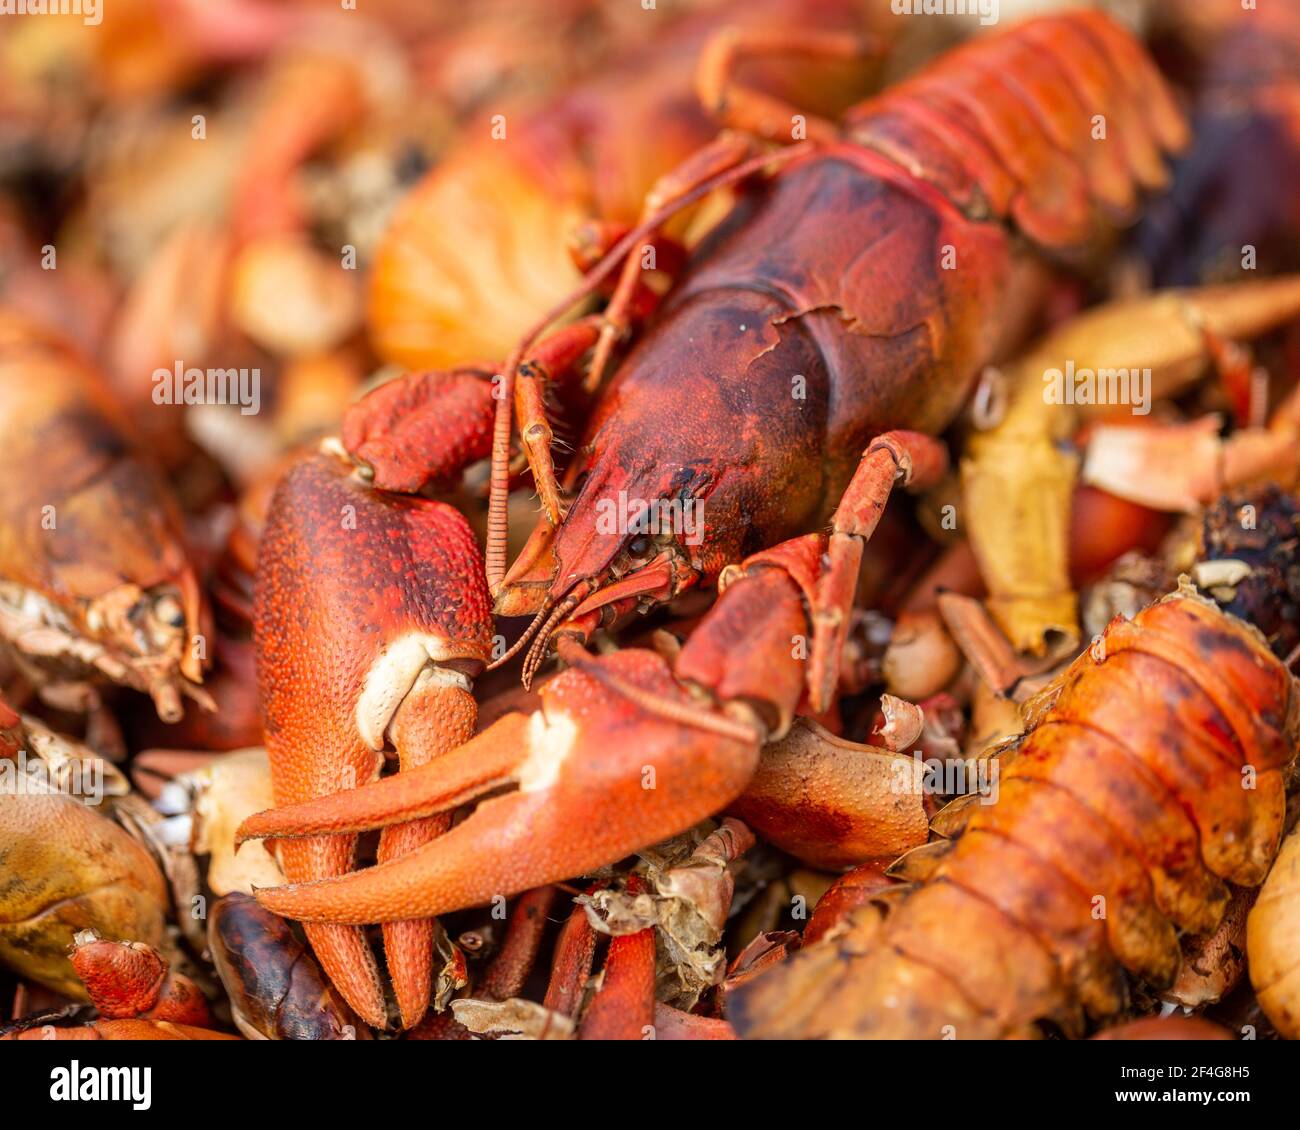 Cooked and dehydrated crayfish Stock Photo